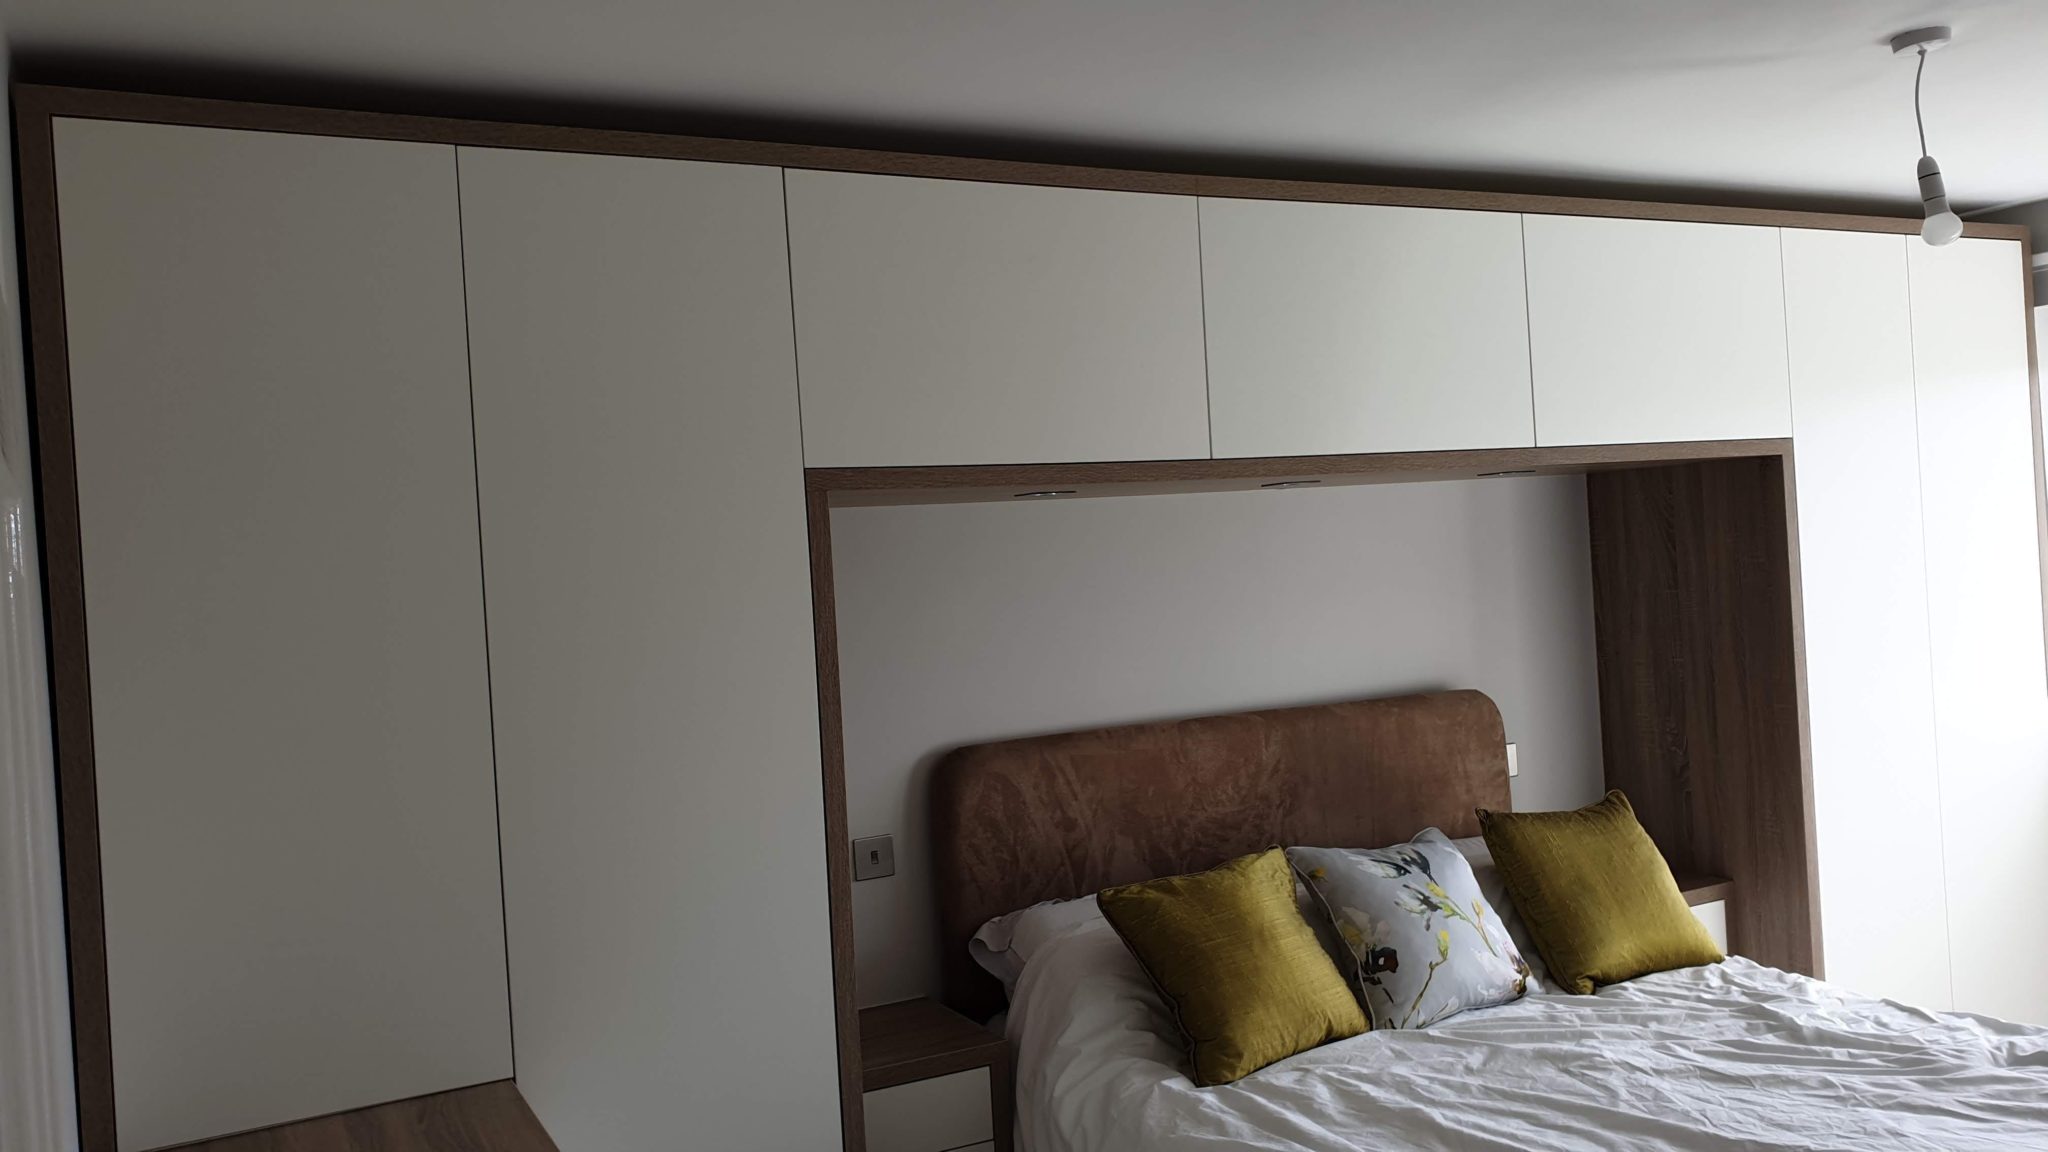 Image of modern style bespoke bedroom furniture made for our customer from Barnsley, South Yorkshire.